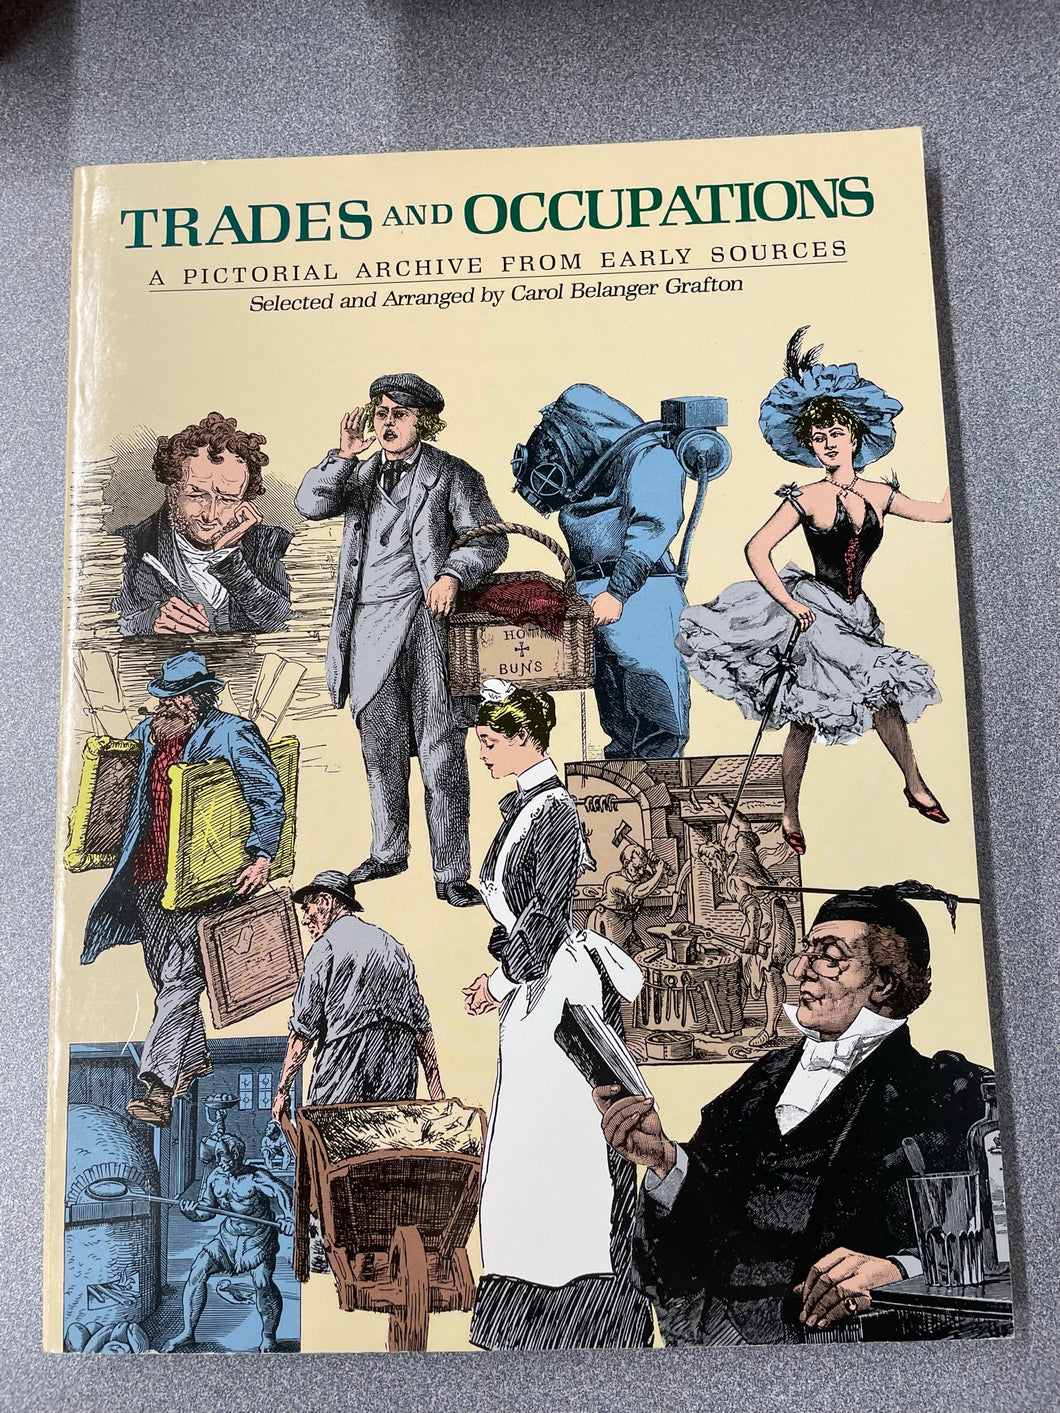 Trades and Occupations: a Pictorial Archive From Early Sources, Grafton, Carol B., ed. [1990] VA 4/23